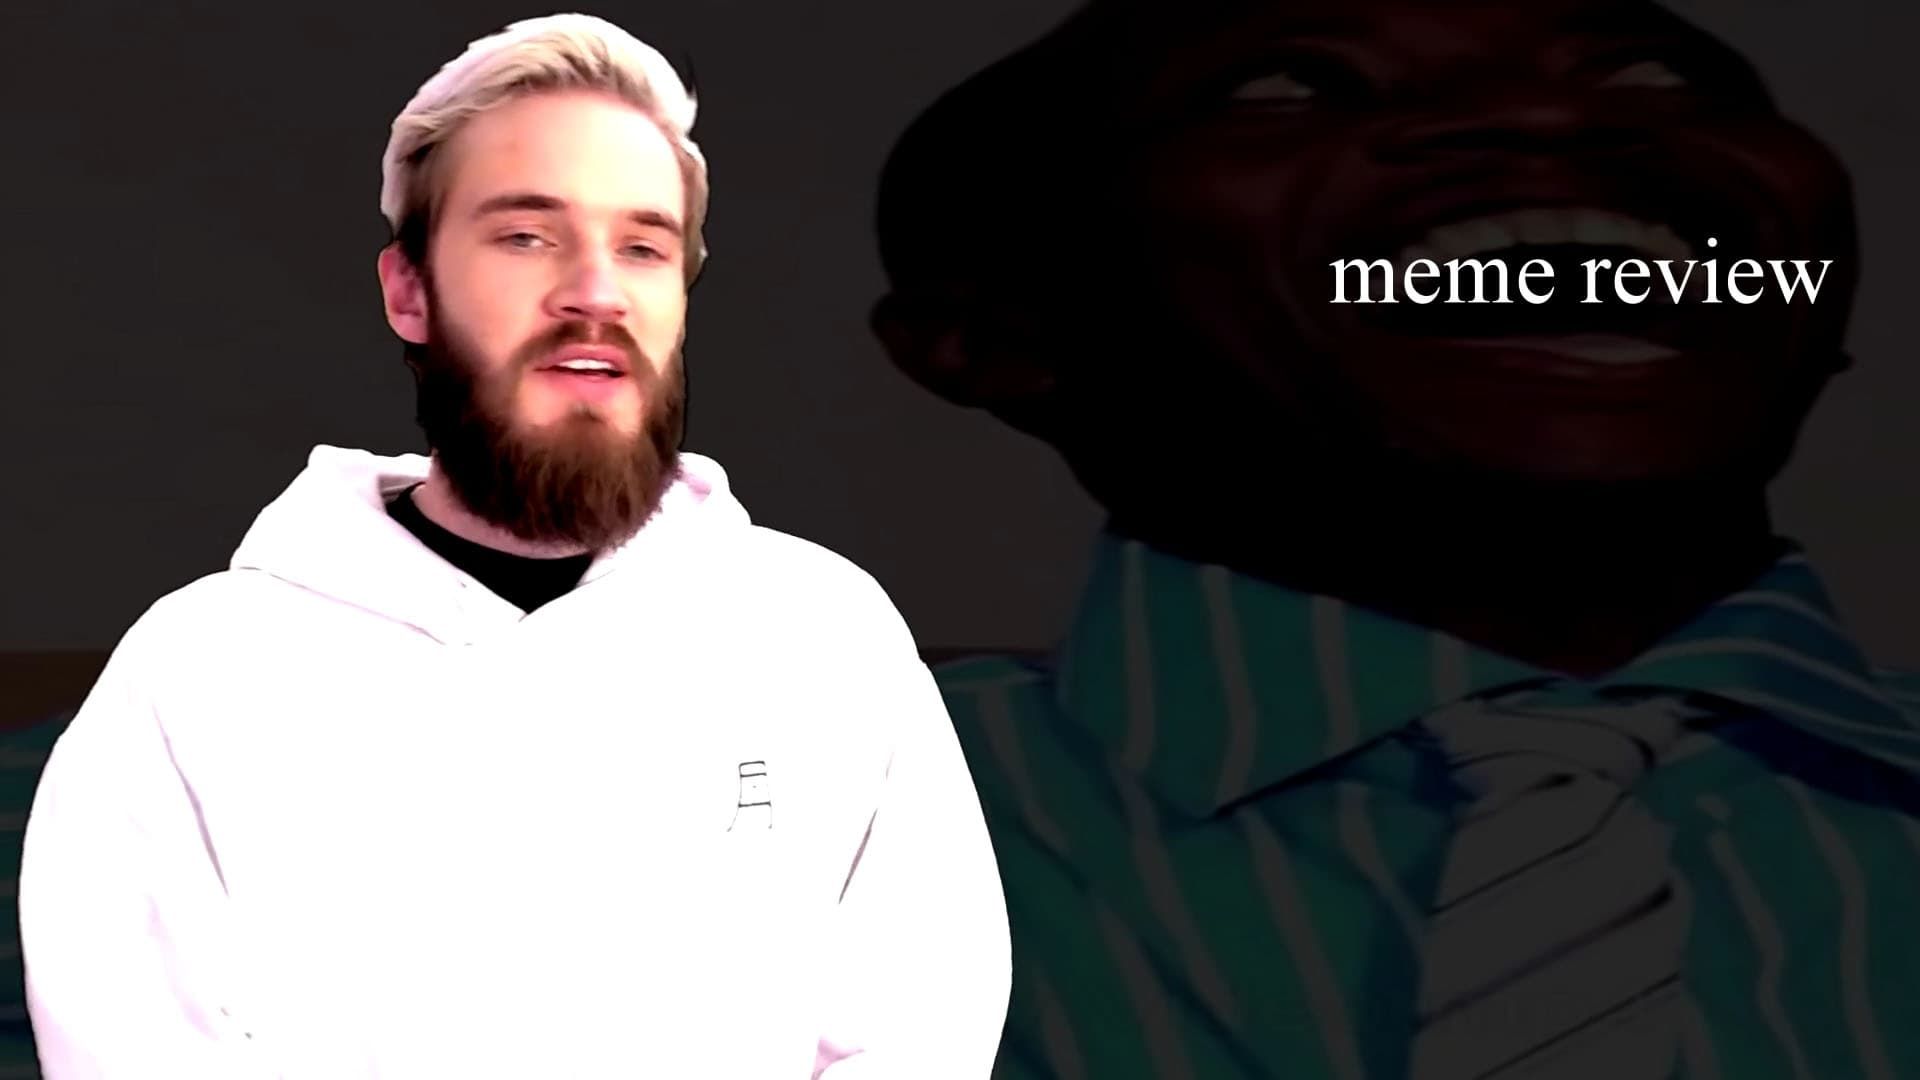 Meme Review background